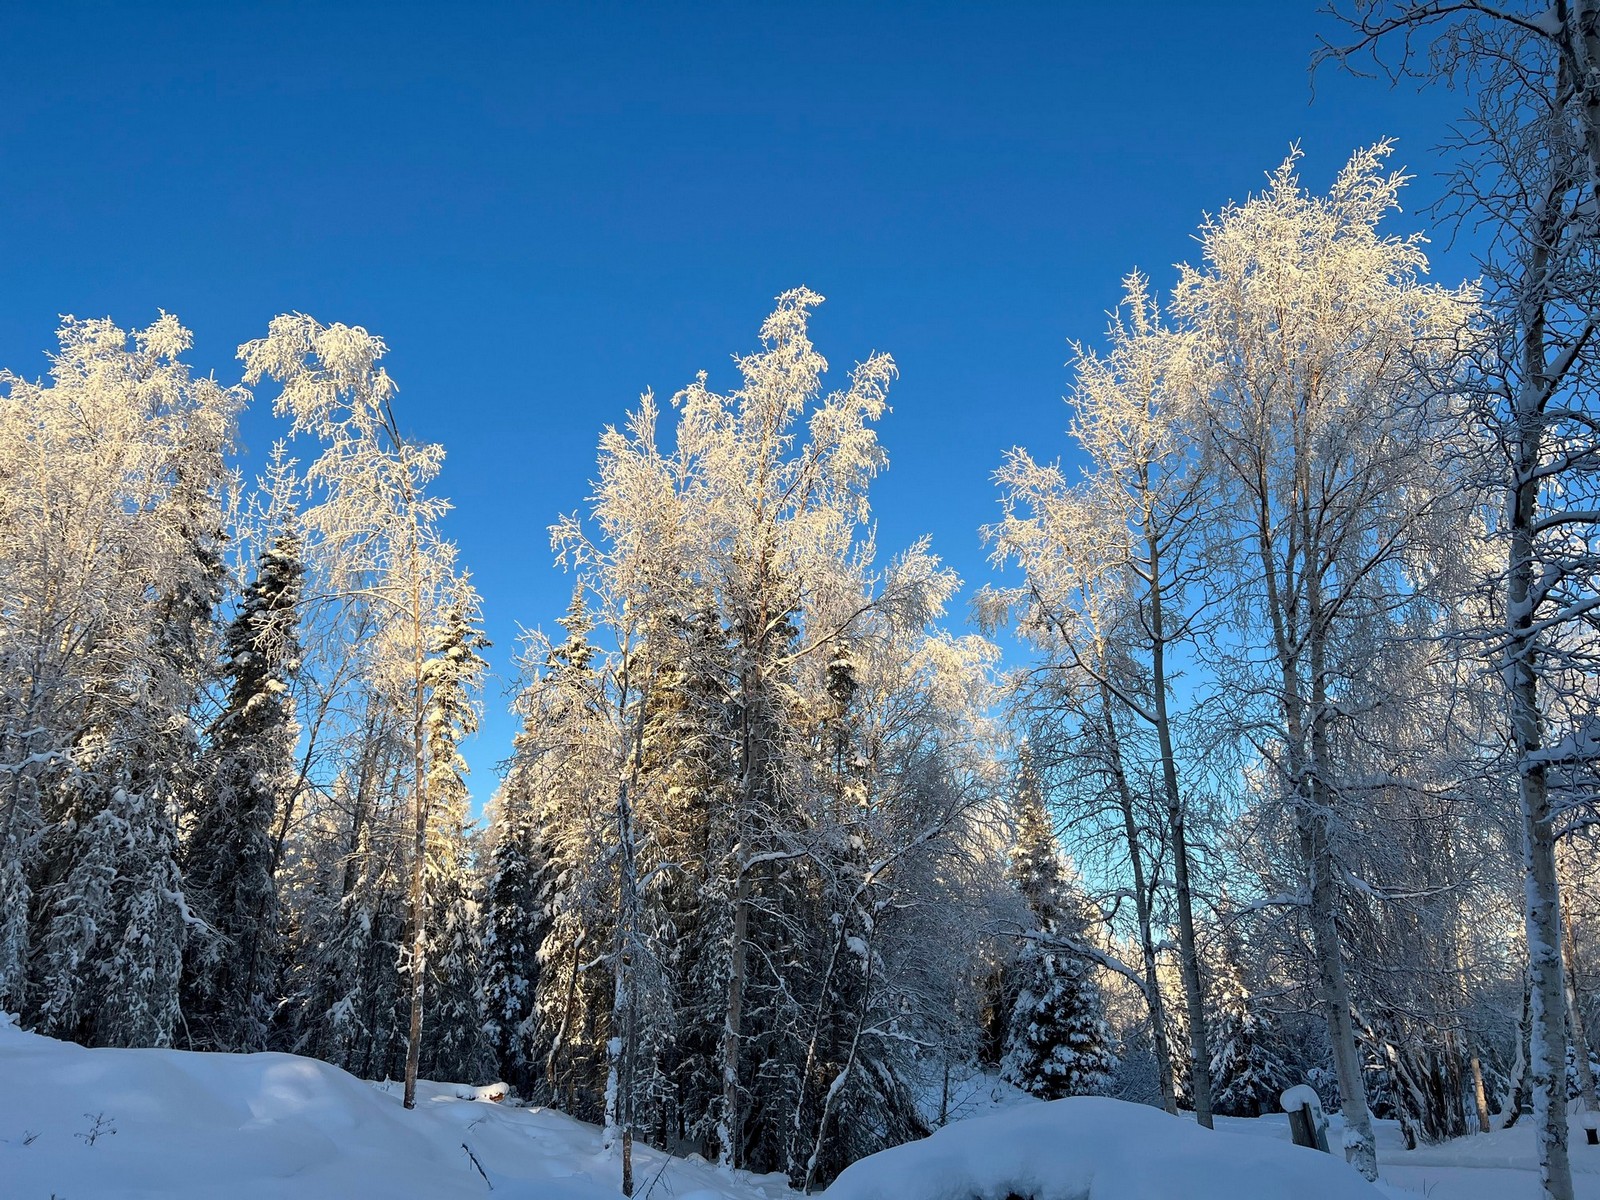 Birch trees covered in hoar frost